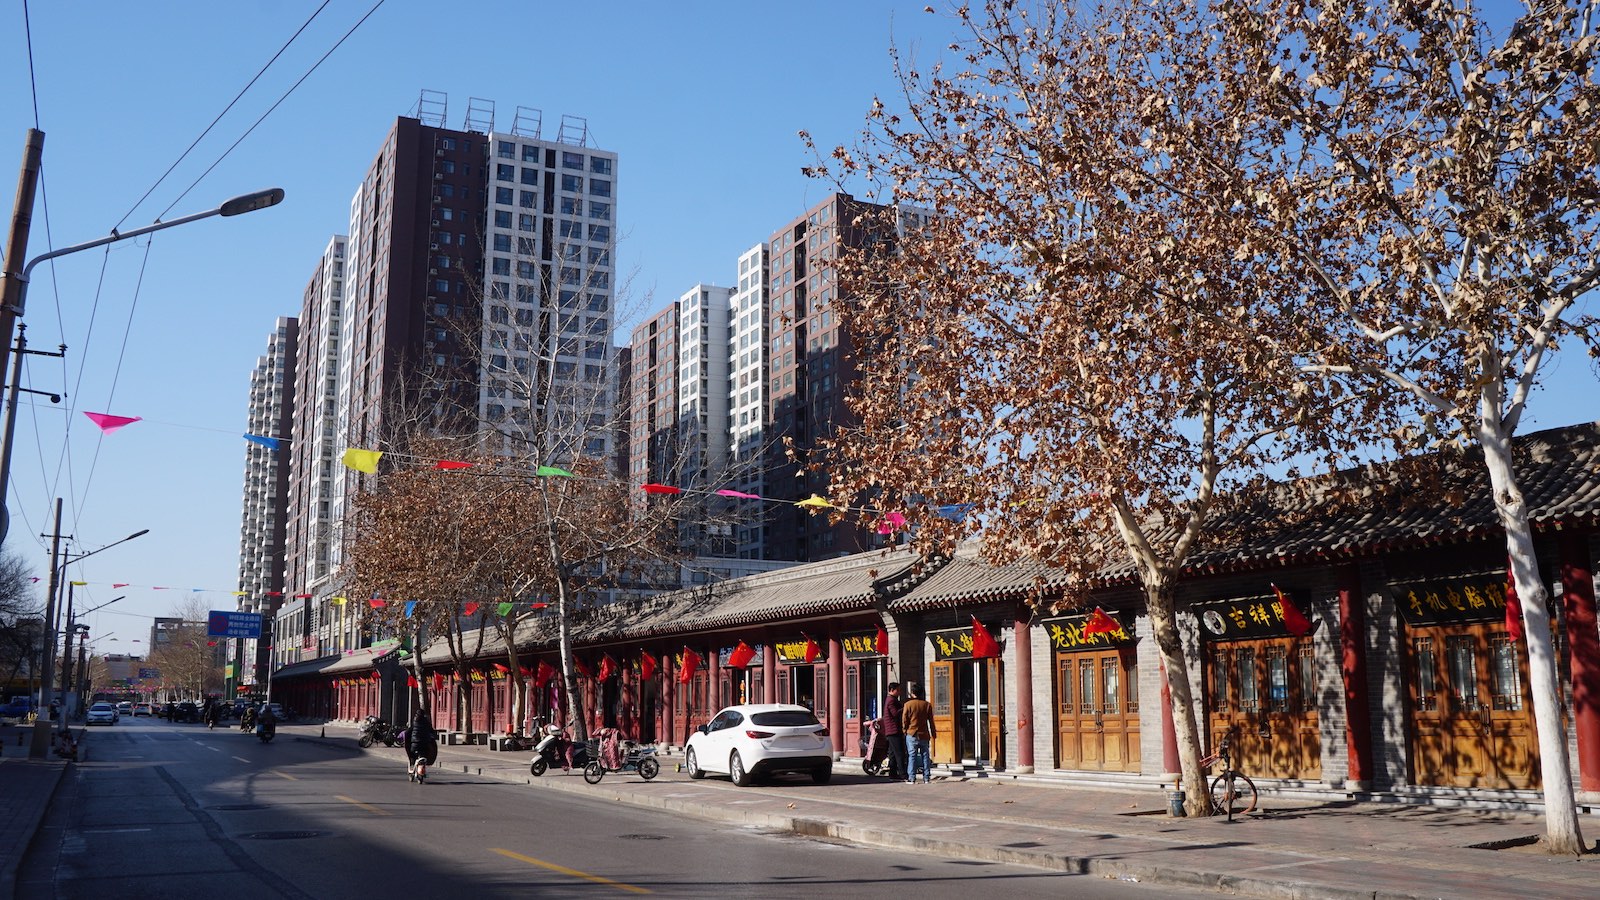 This is a random street in my old hometown of Shijiazhuang, China. It's very different from what it was when I was a little kid.